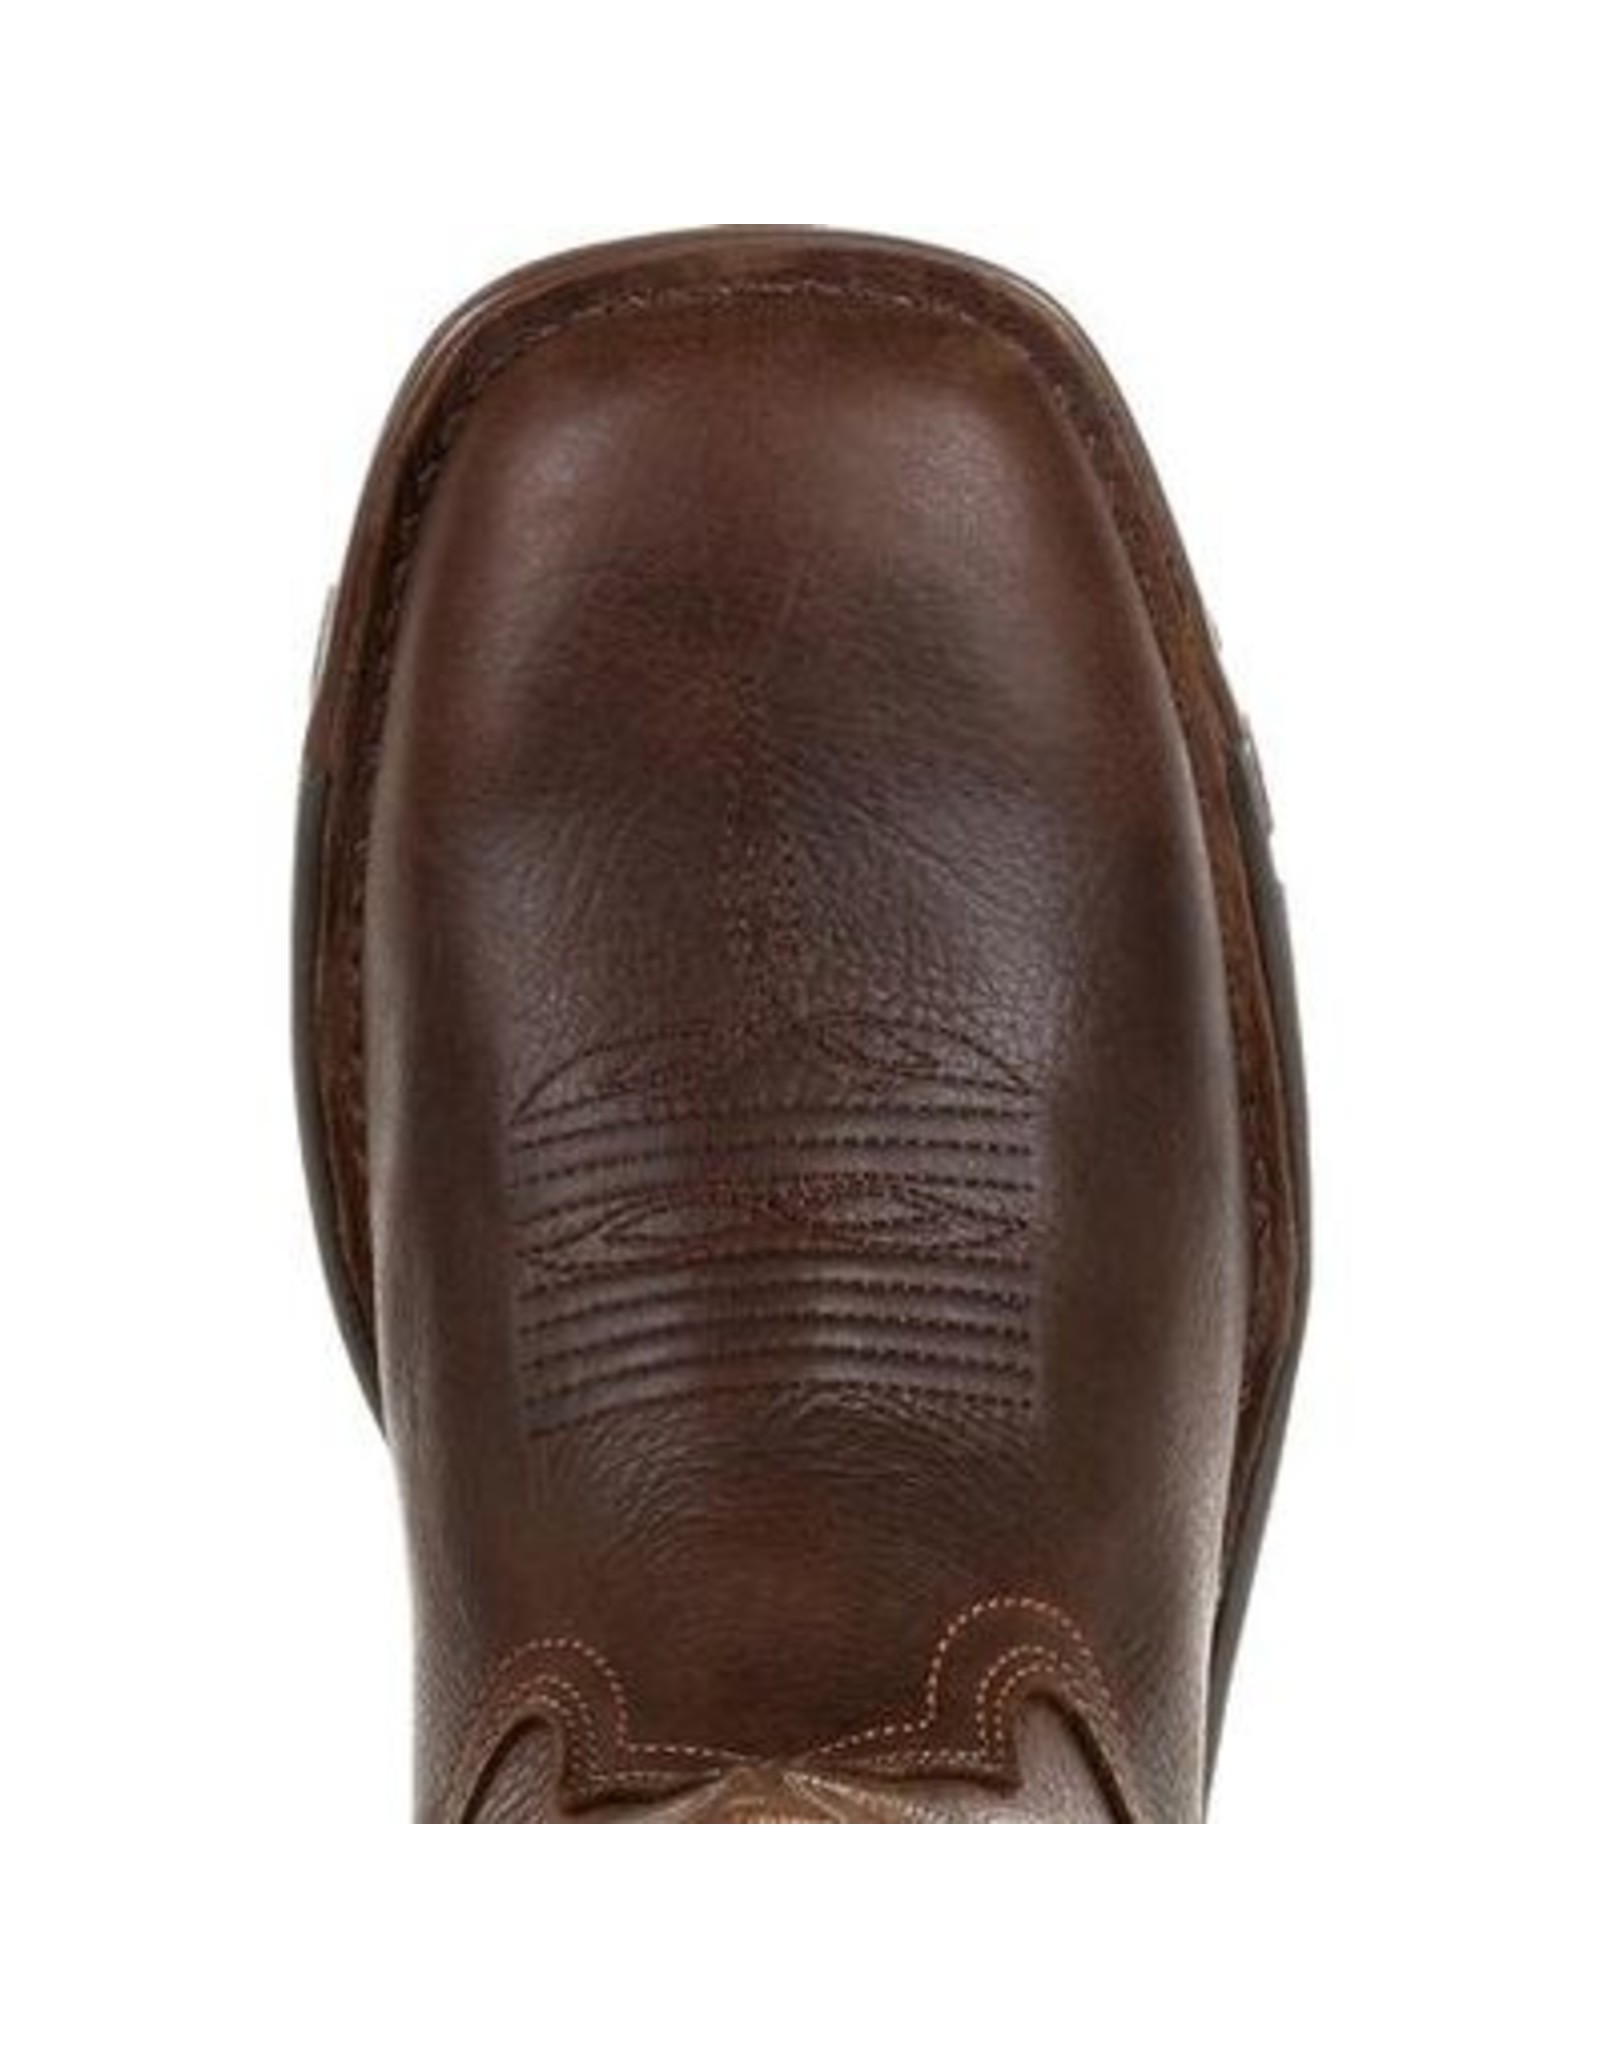 Boots-Men ROCKY Legacy 32 RKW0315